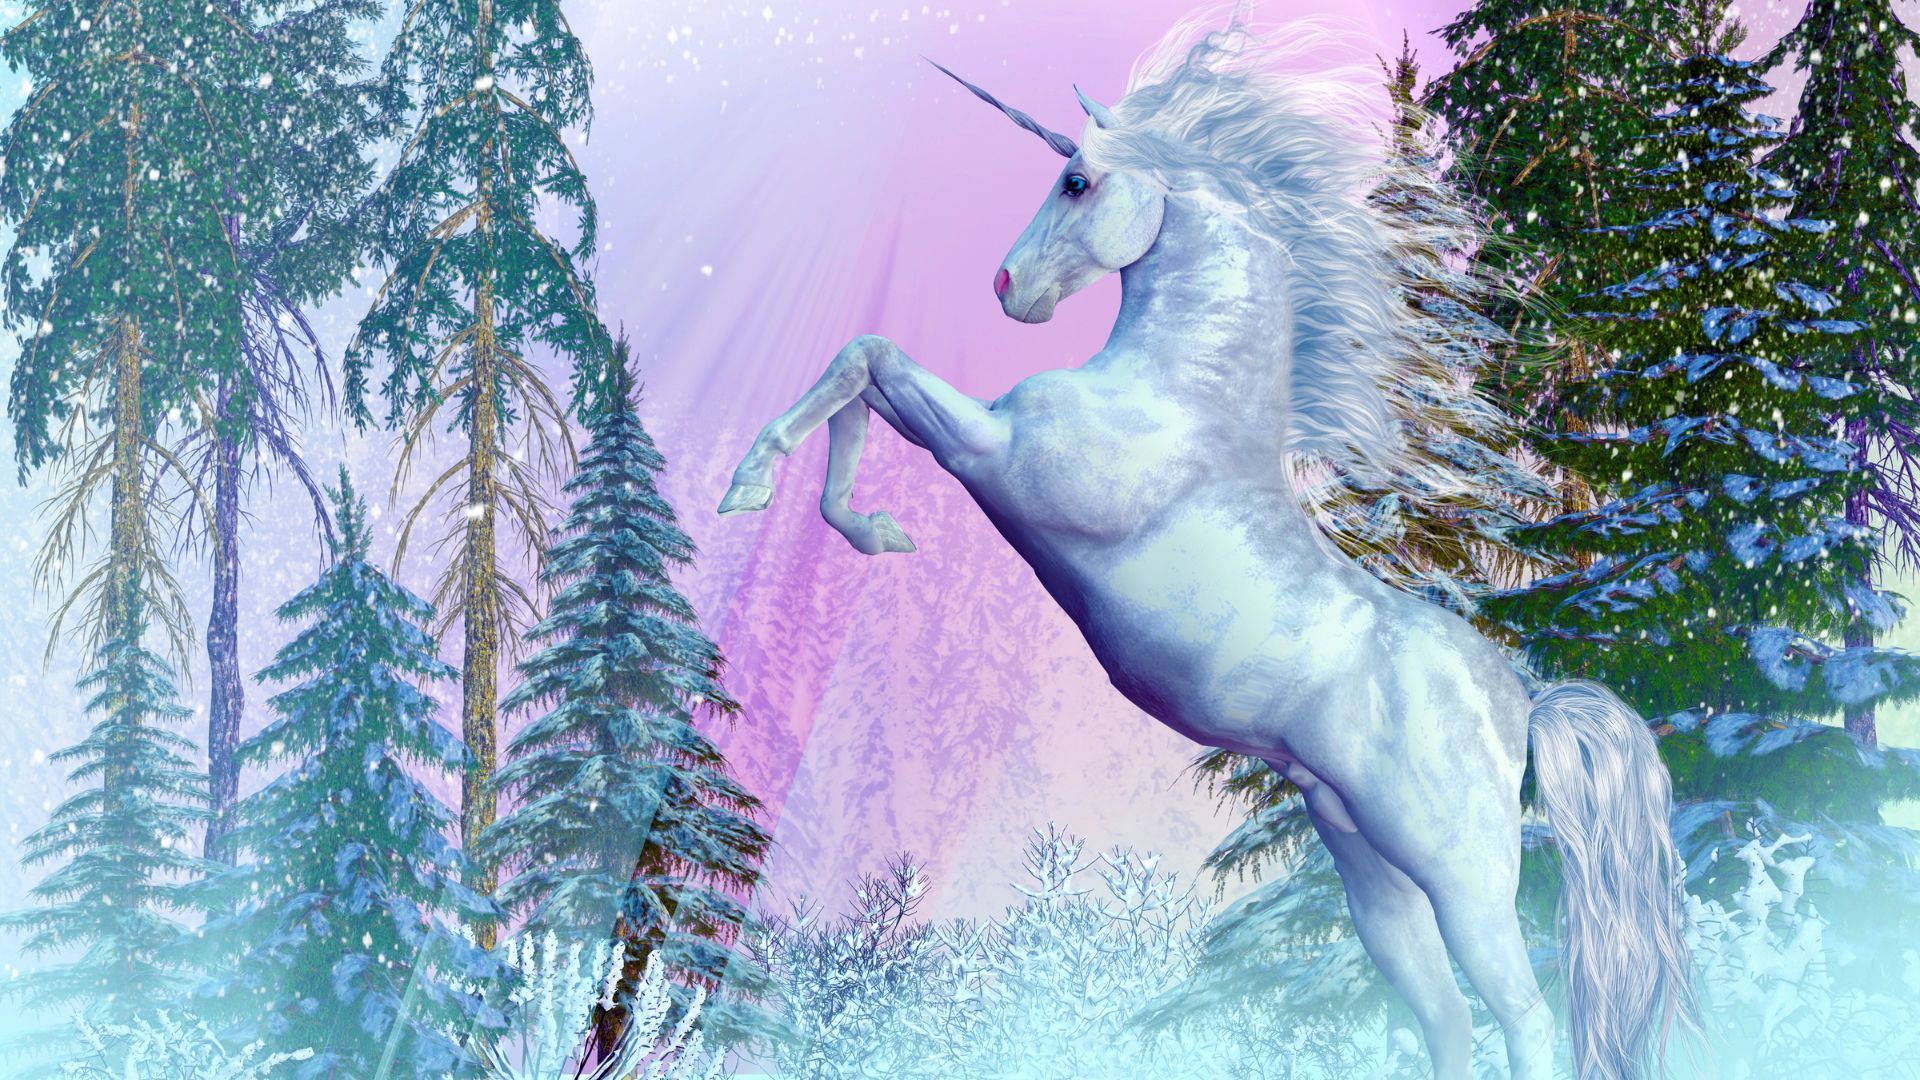 A White Unicorn Standing In The Snow Wallpaper